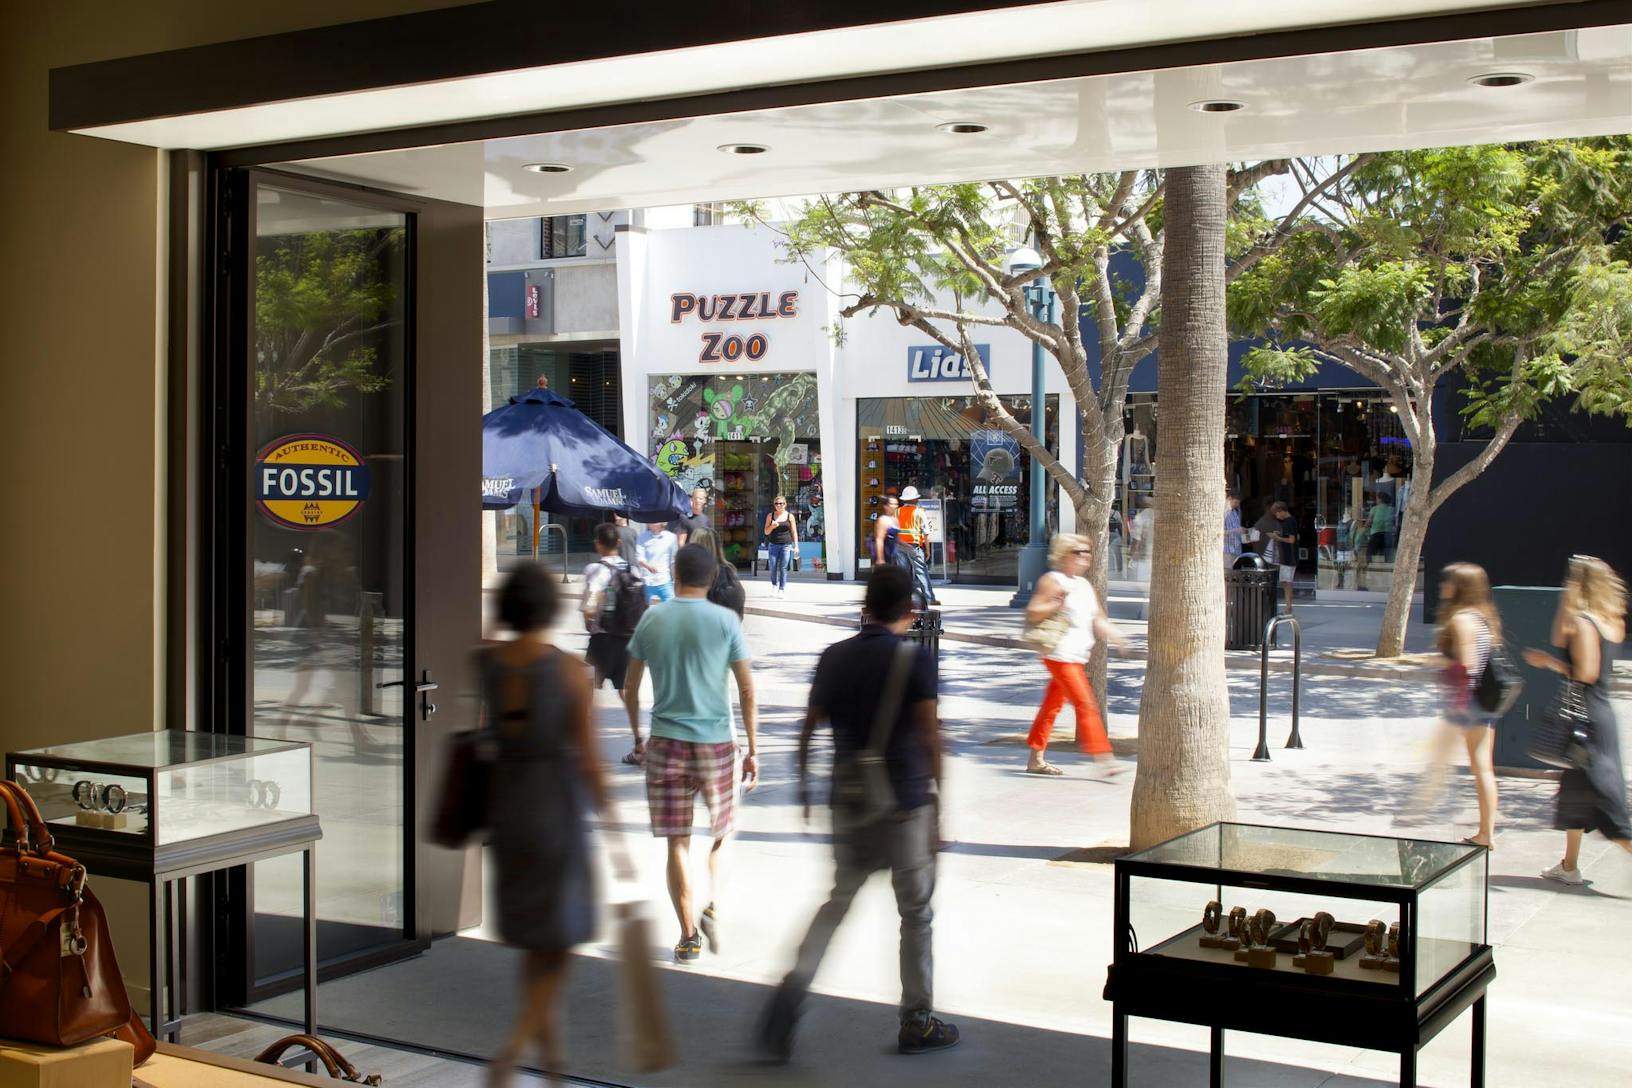 SL70 Retail  Folding Entry Doors at the Fossil Store in Santa Monica, CA - Opened Interior Day View